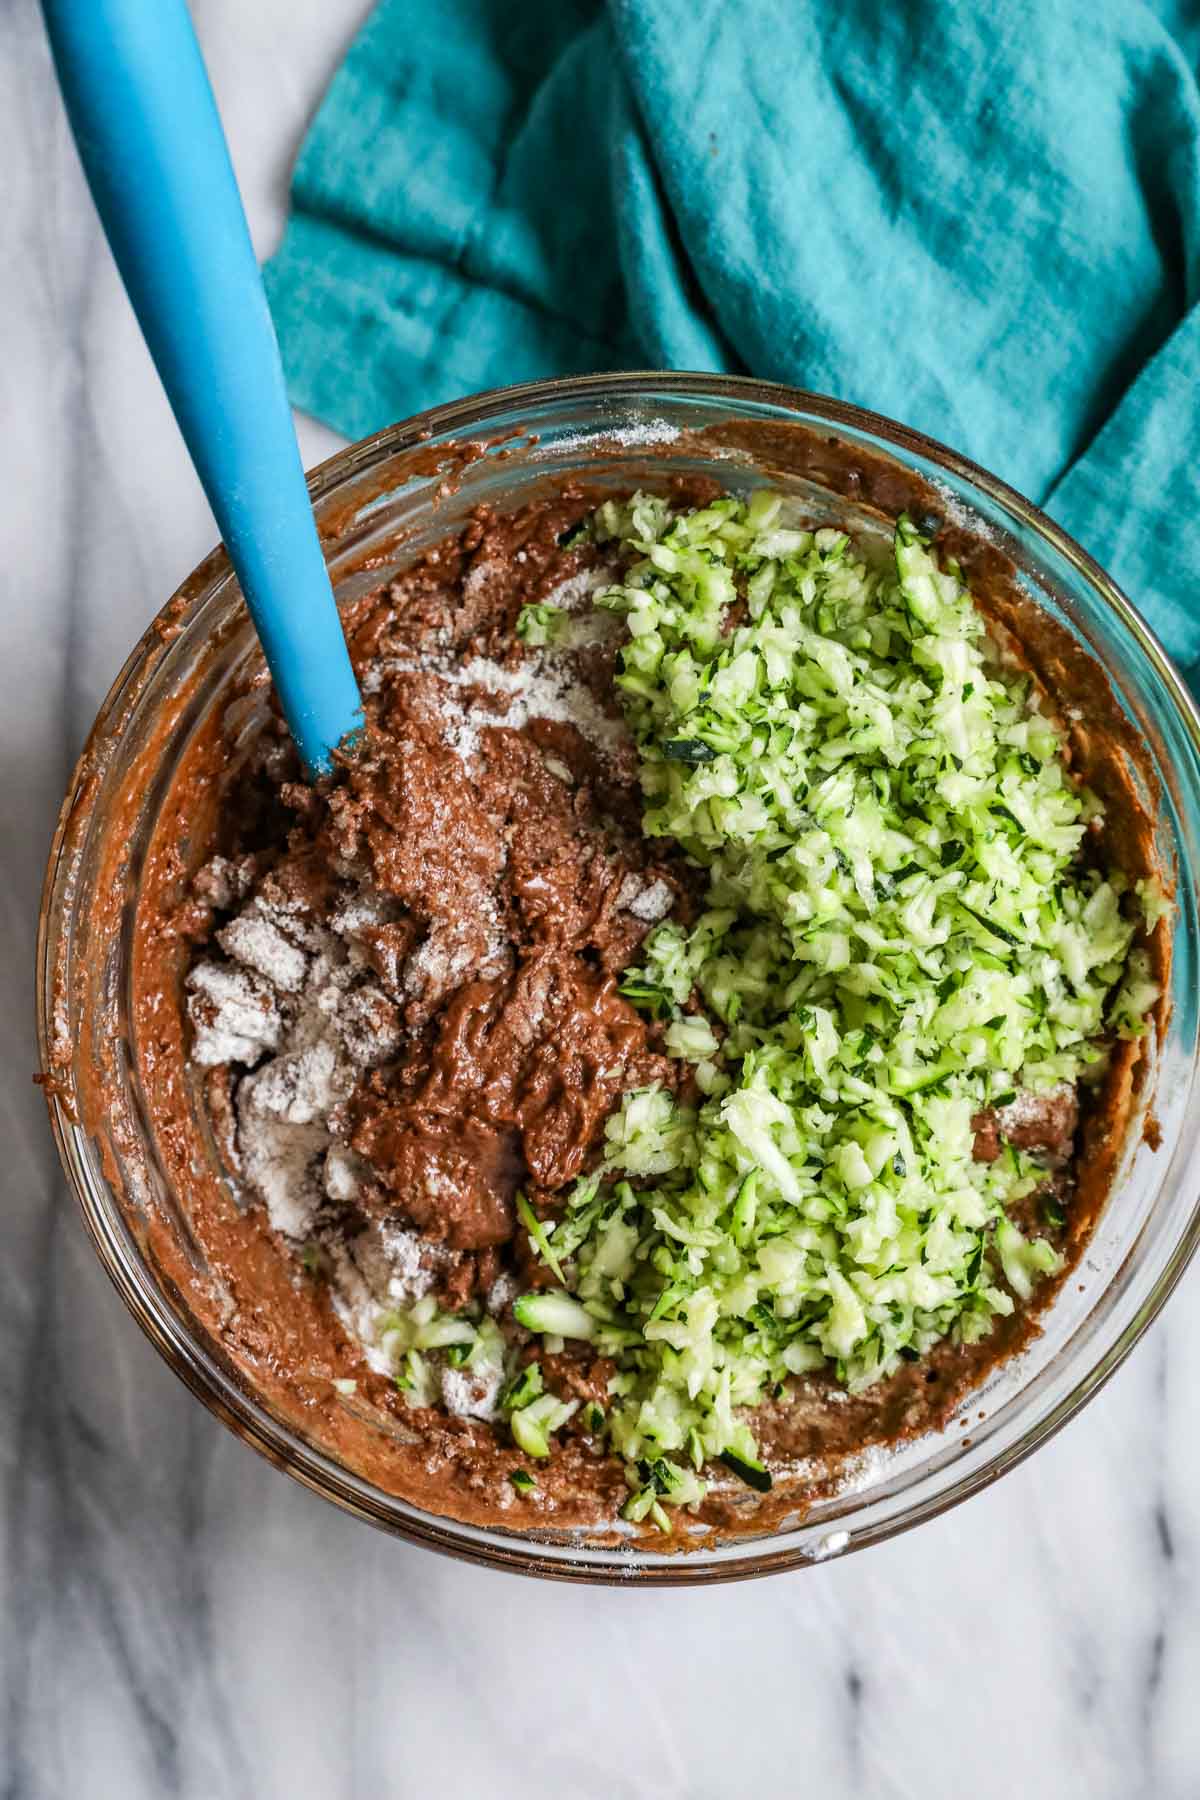 mixing shredded zucchini into chocolate batter